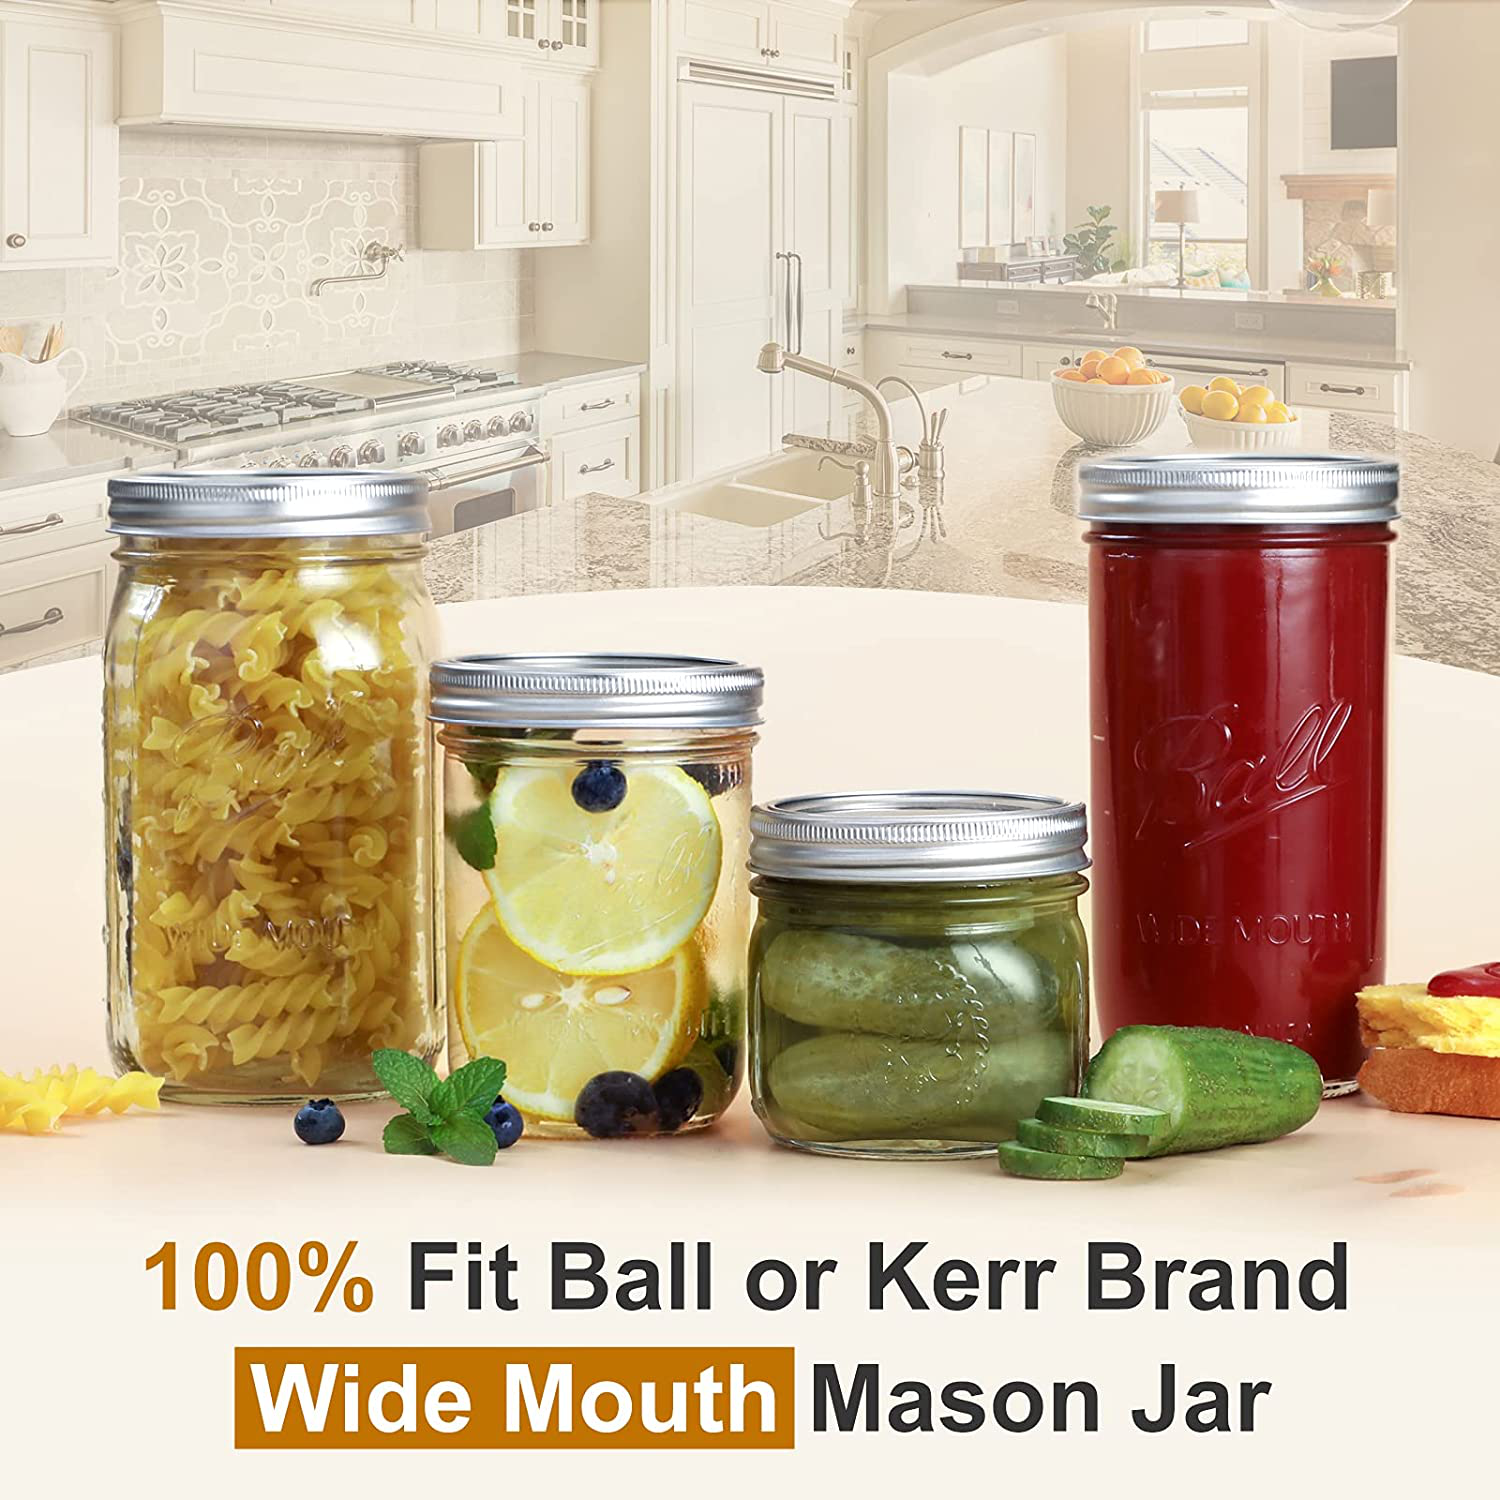 72 Count, [ WIDE Mouth ] Canning Lids for Mason Jars - Split-Type Metal Lid for BALL KERR Jar - Airtight Sealed - Food Grade Material